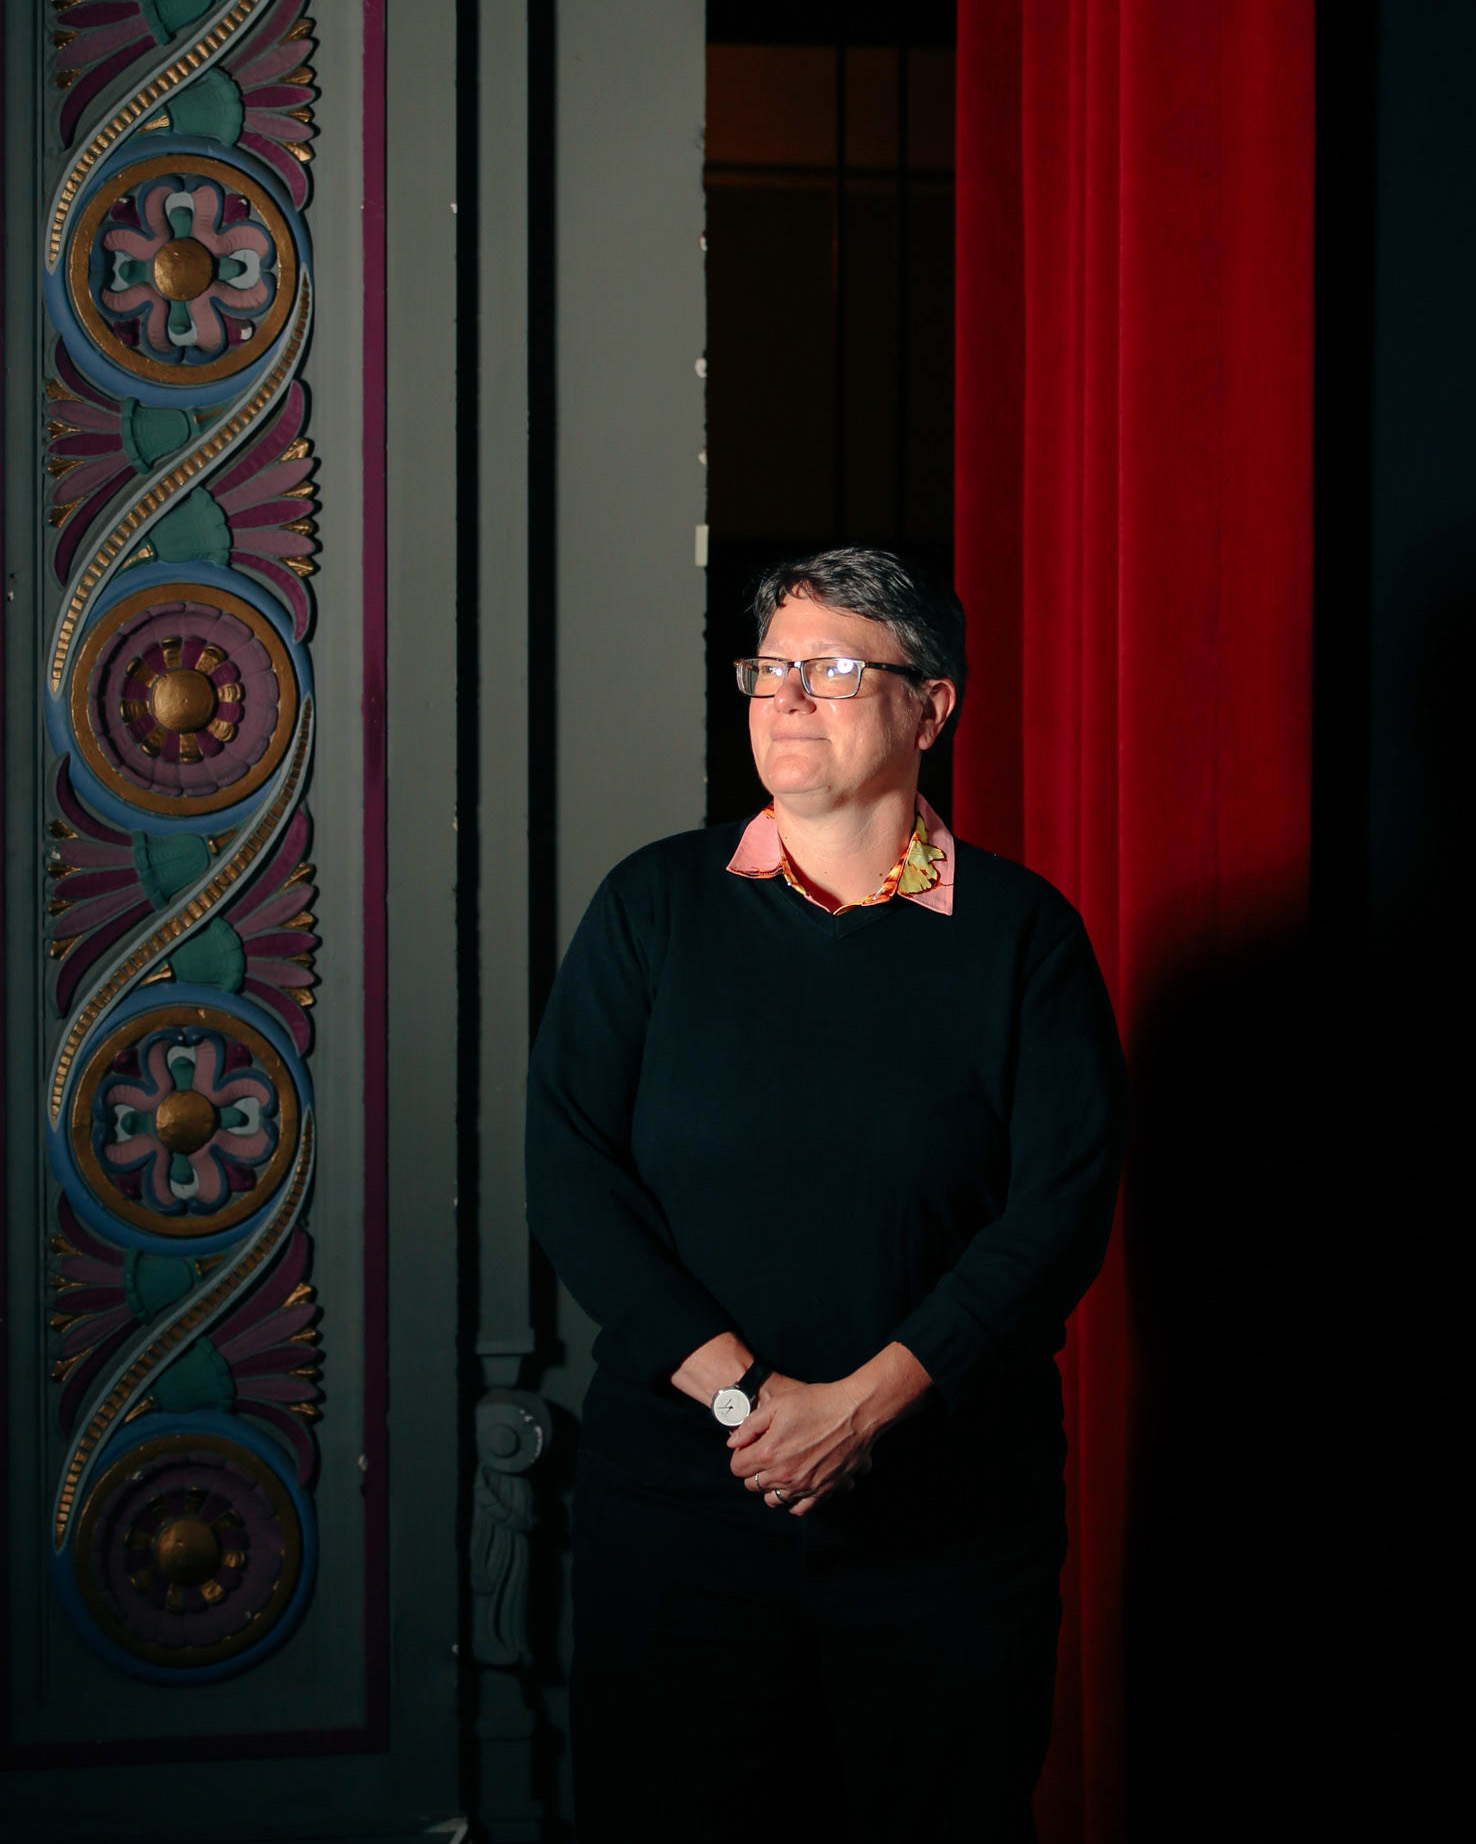 An image of a person against a theater backdrop looking away from the camera, to the side